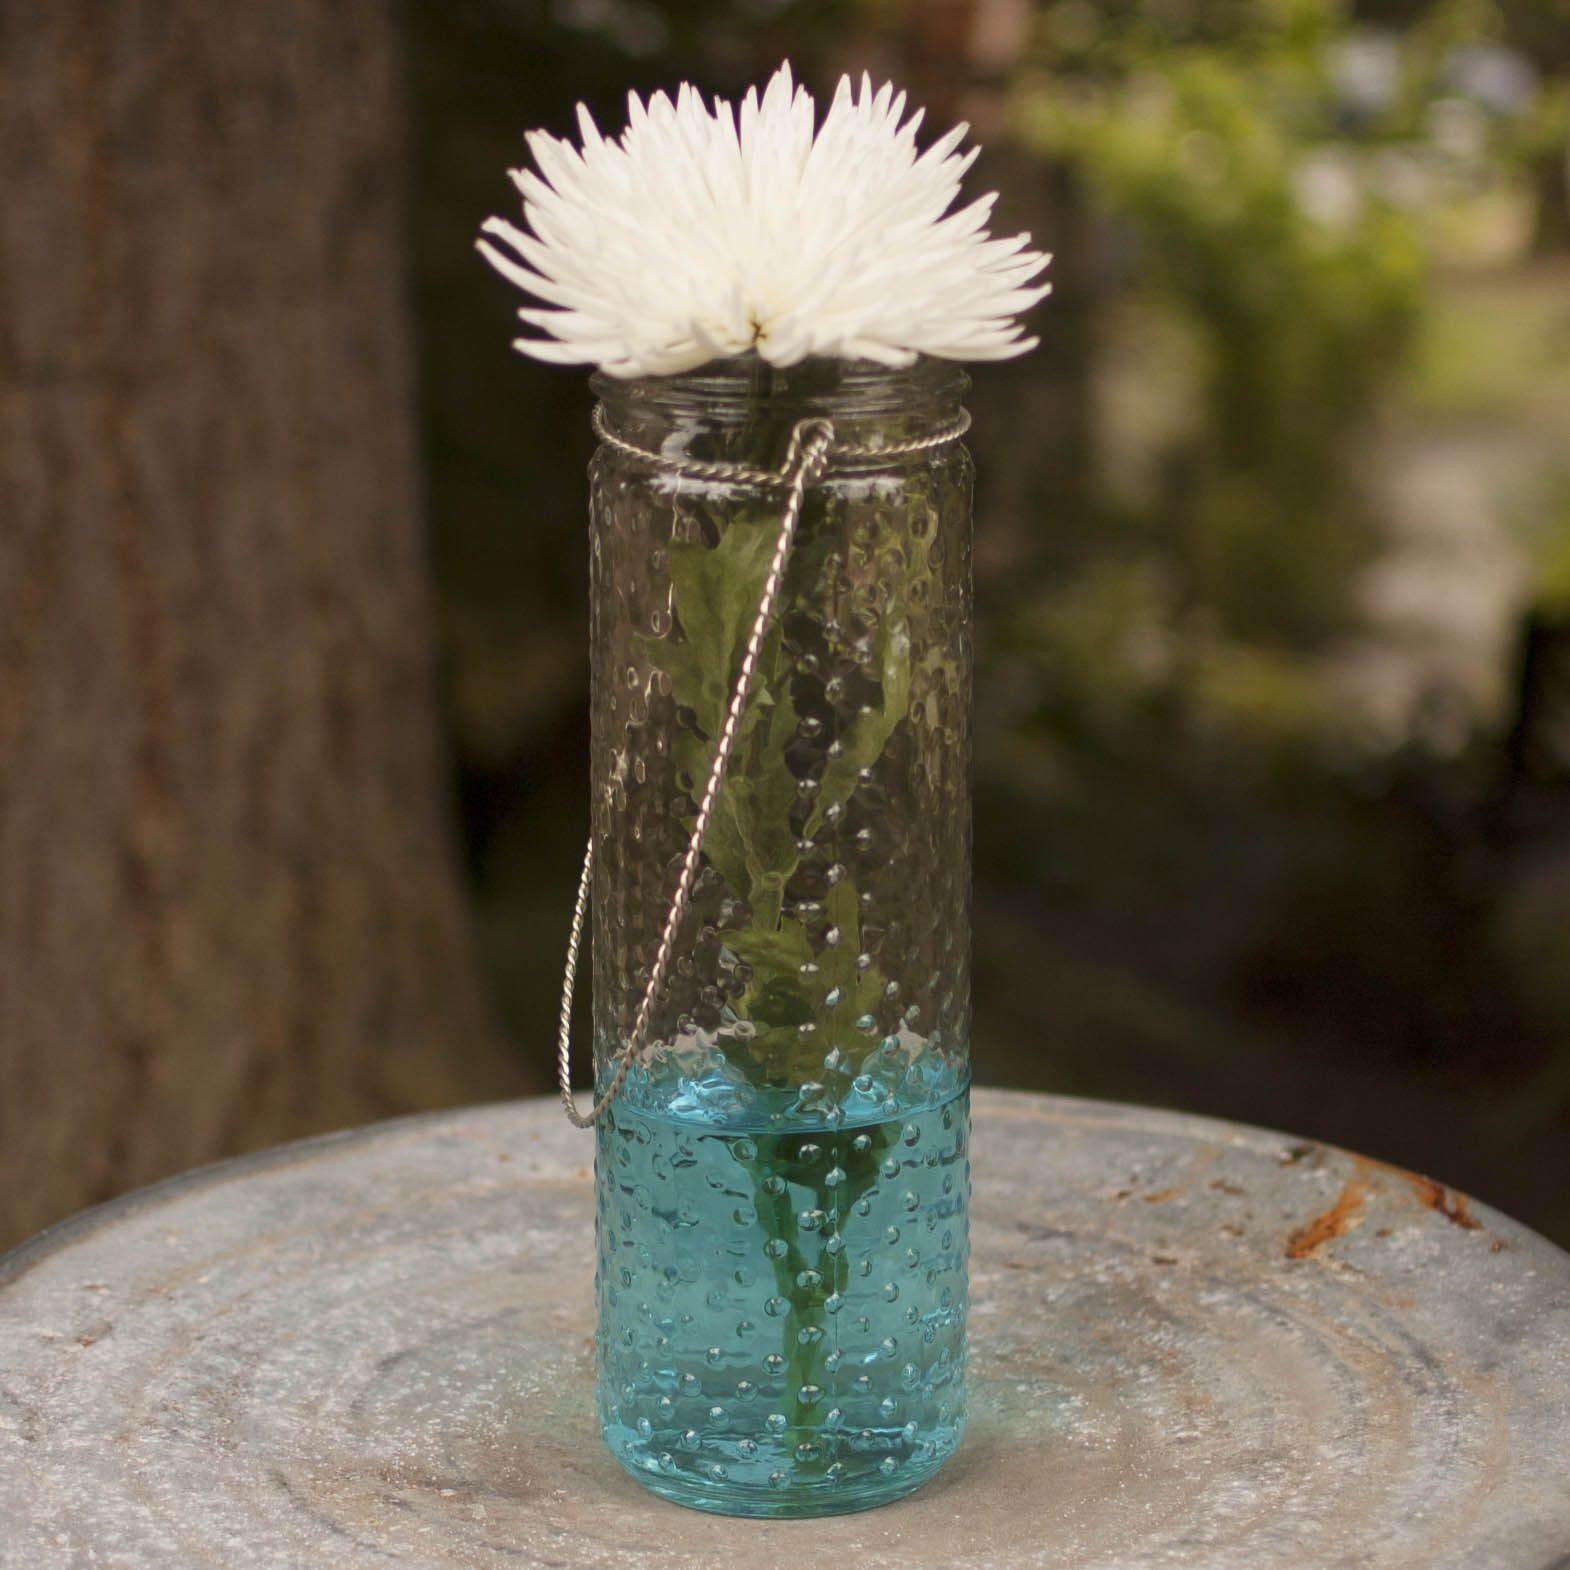 12 inch tall glass vases of our tallest hobnail vase at 12 inches tall will permit you to with explore glass bottles glass vase and more our tallest hobnail vase at 12 inches tall